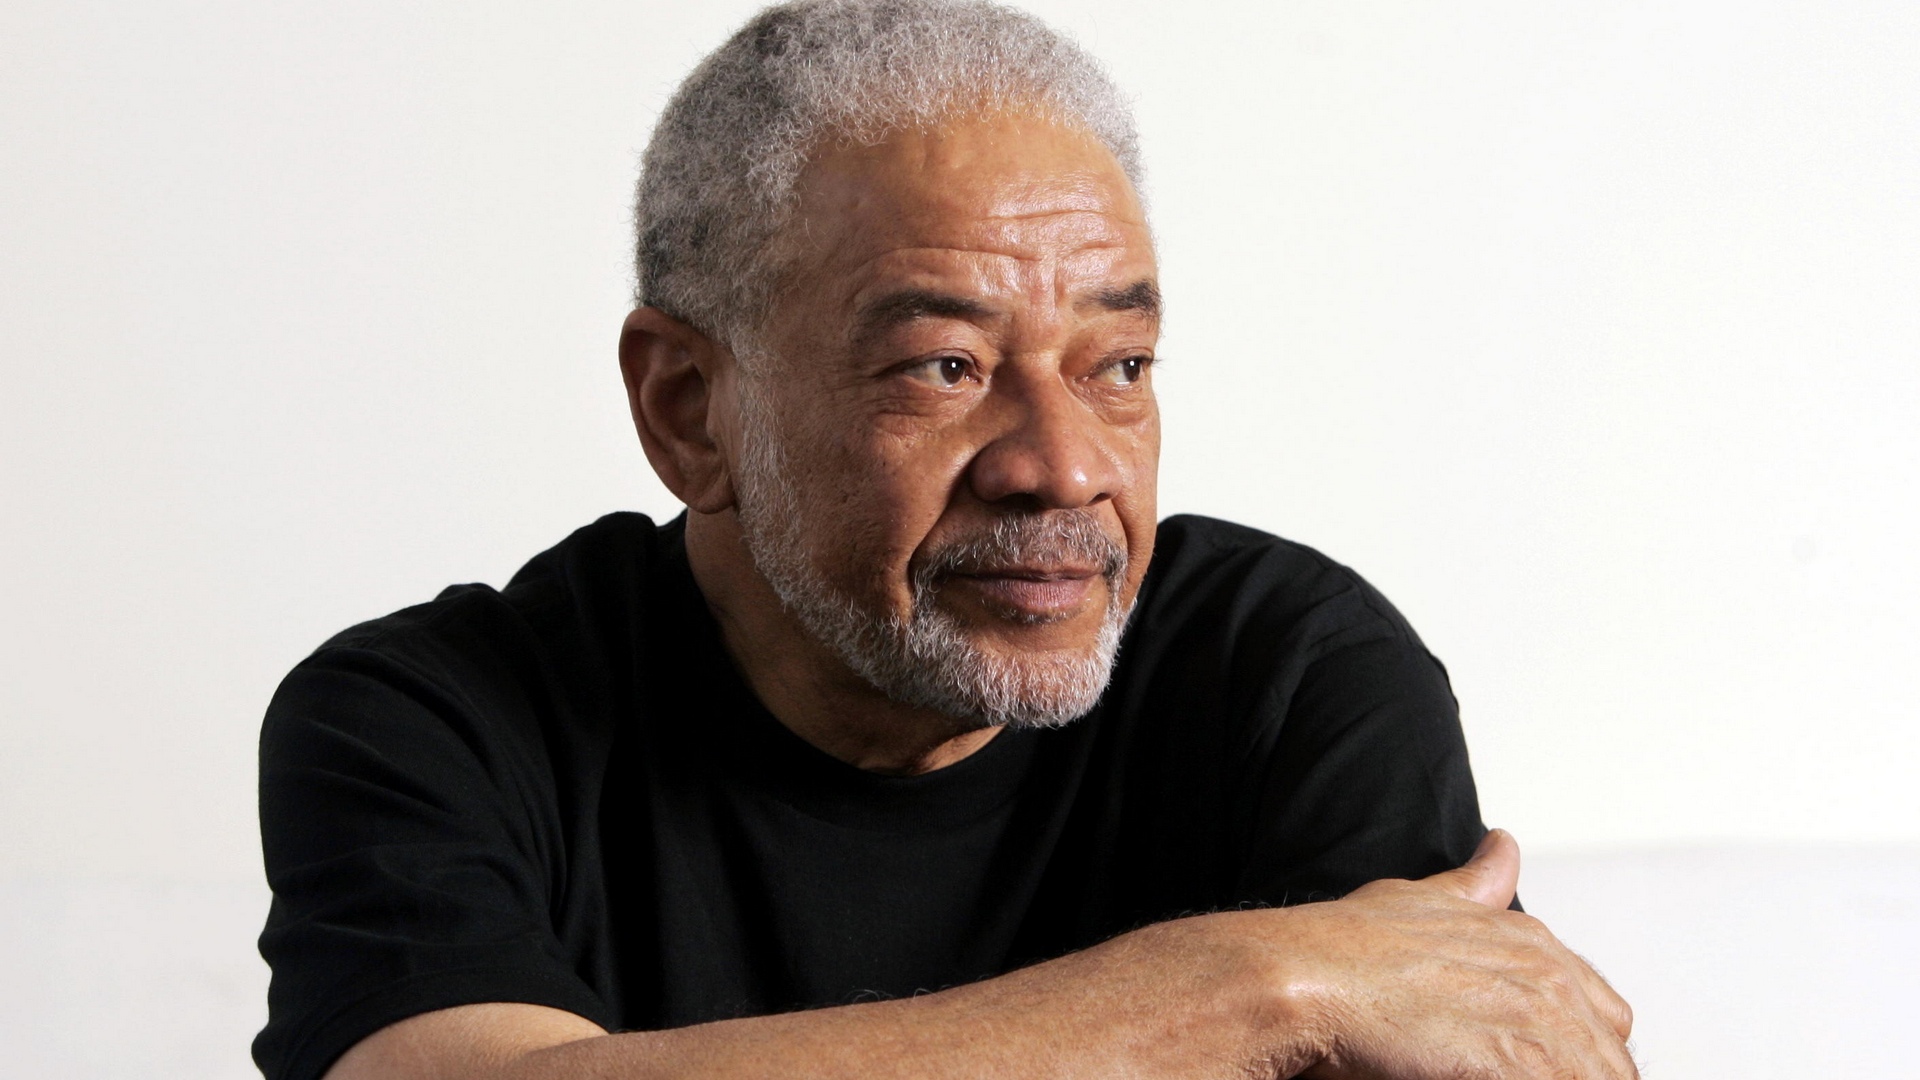 Who Is He? av Bill Withers